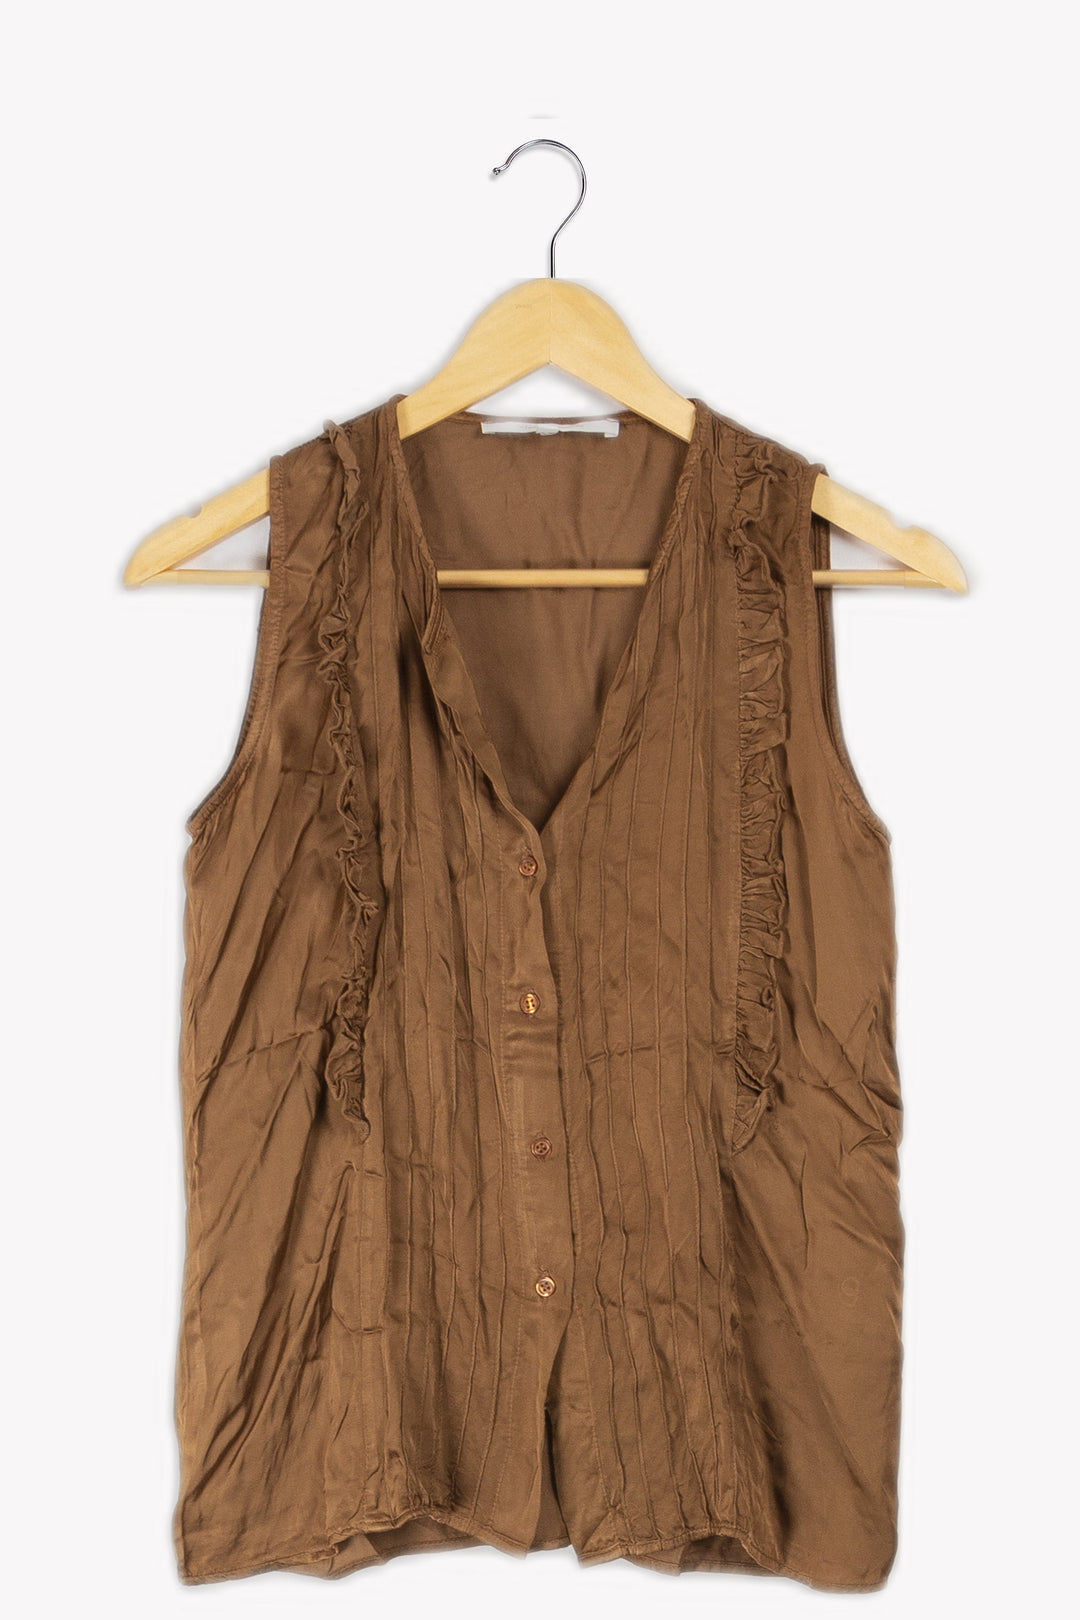 Brown sleeveless top - Size 36